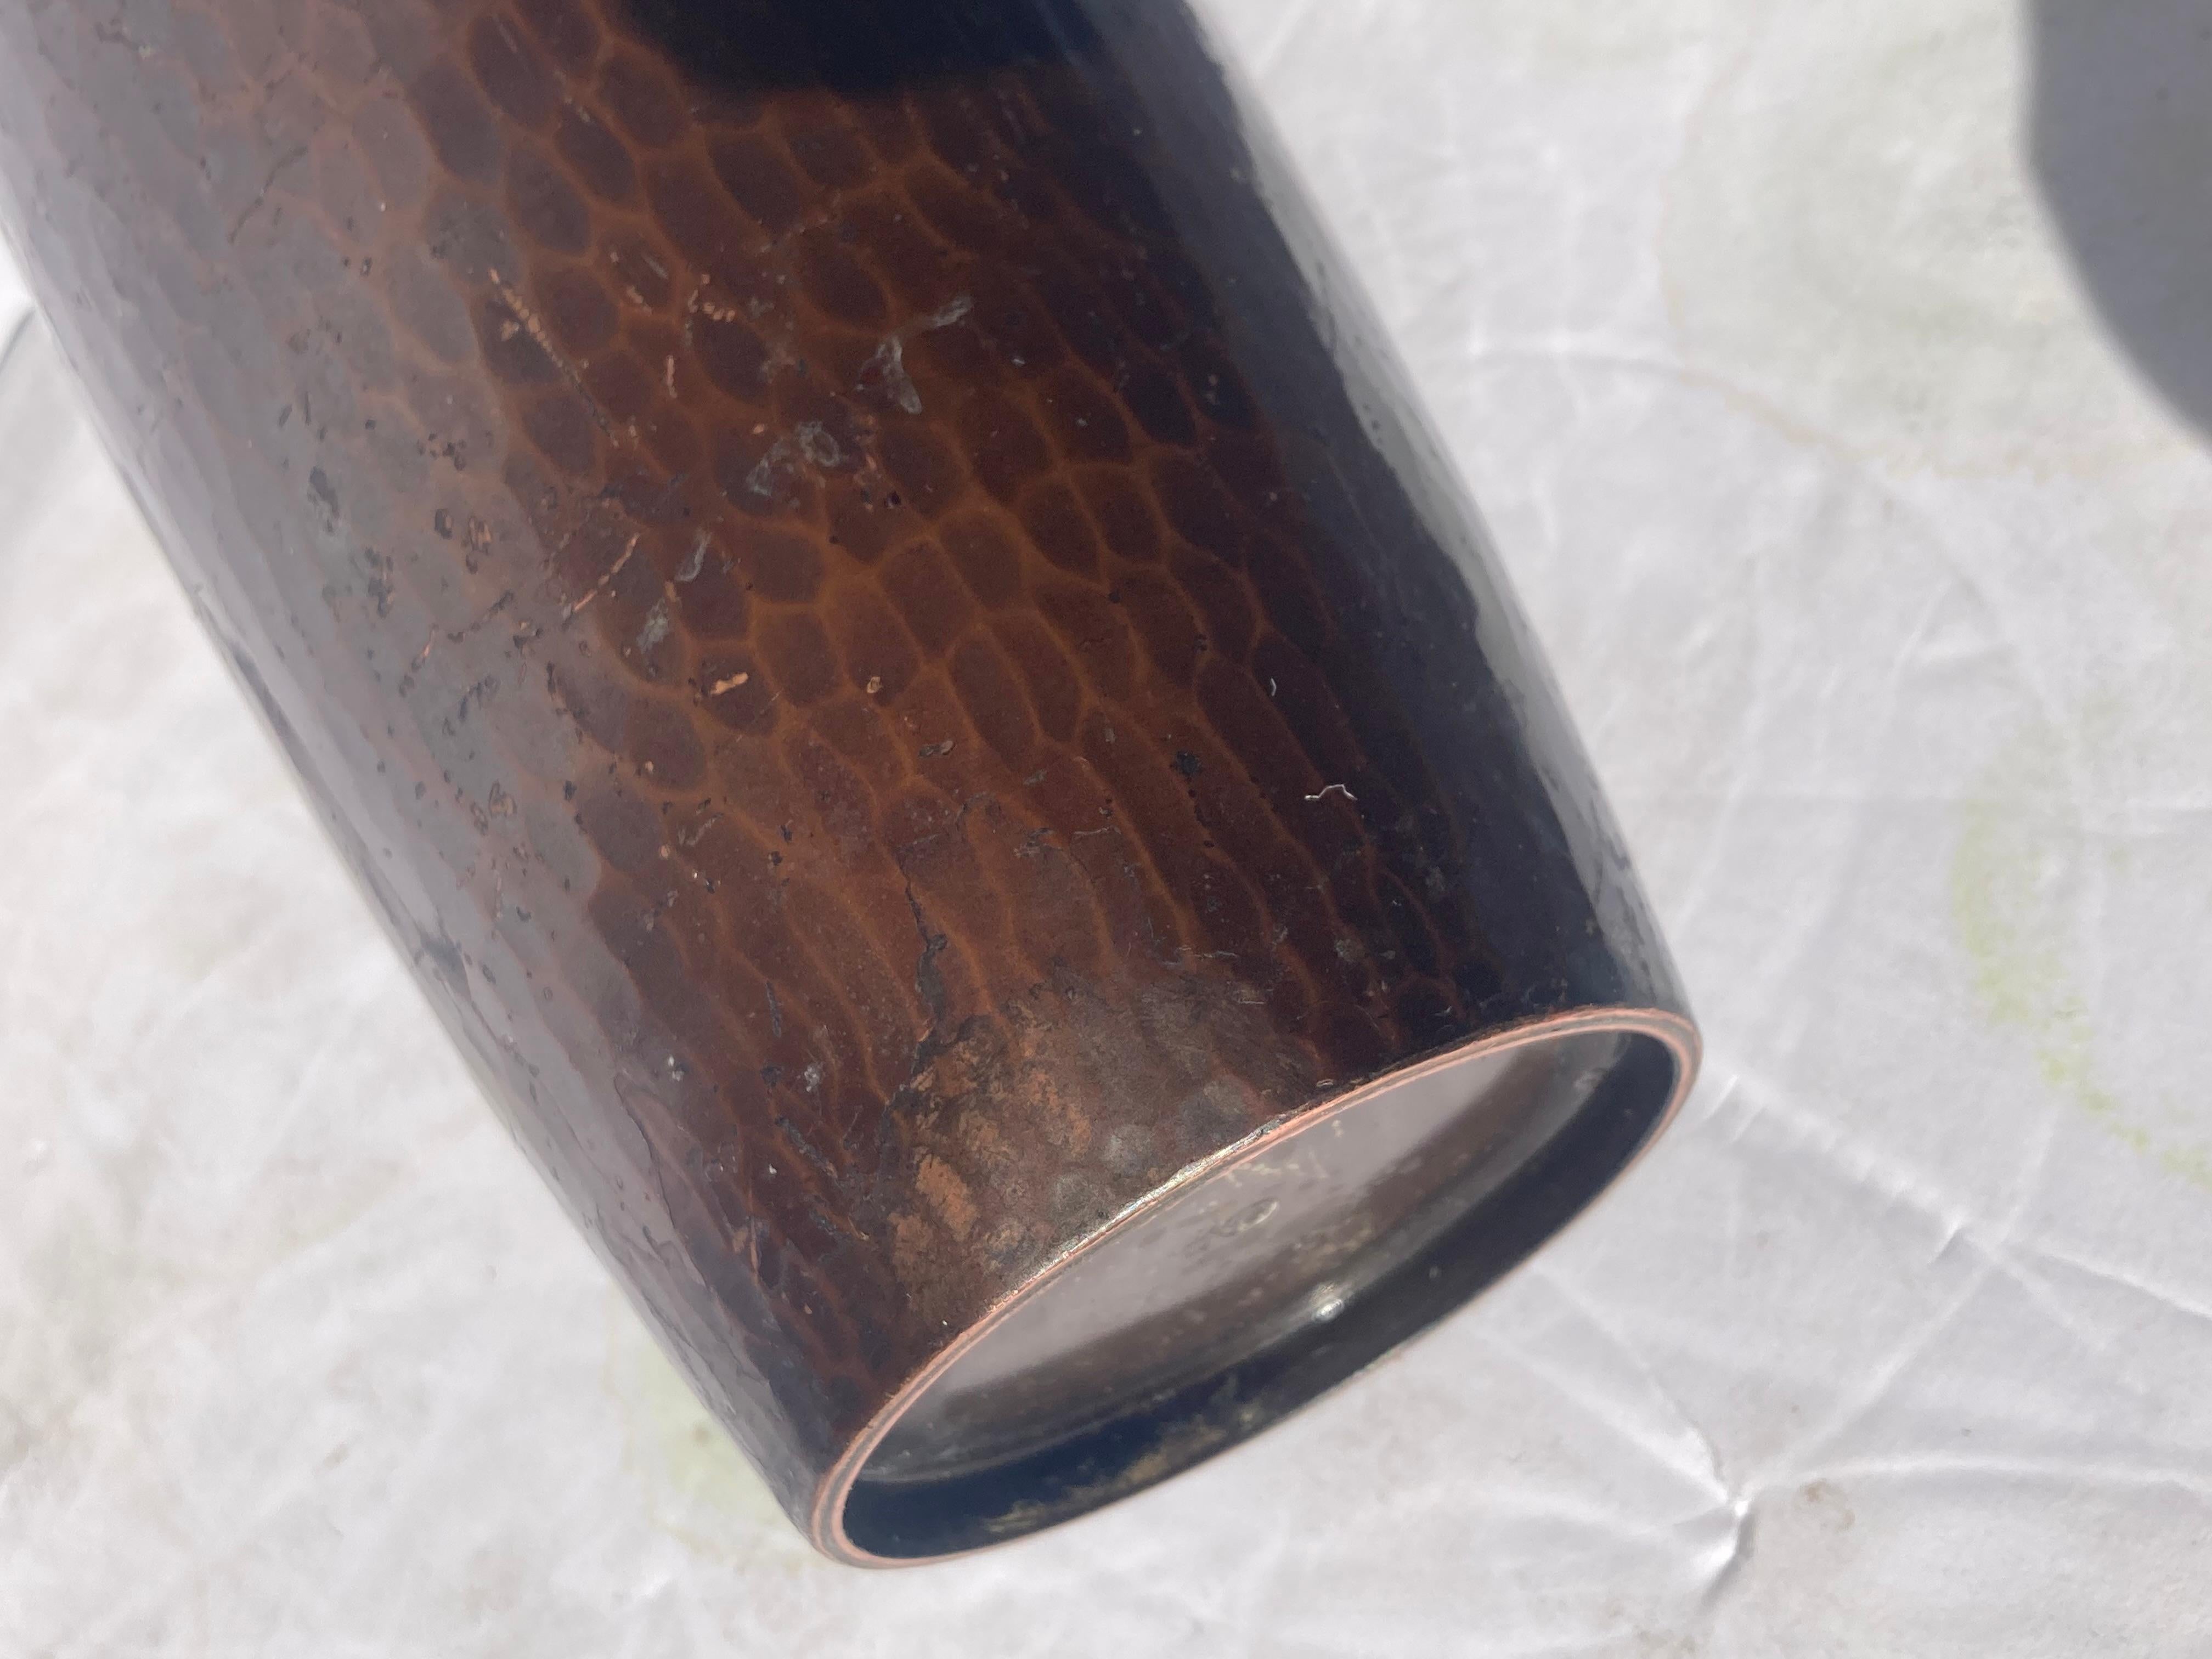 American Roycroft Hammered Copper Vase, Arts and Crafts Movement, Brown Patina